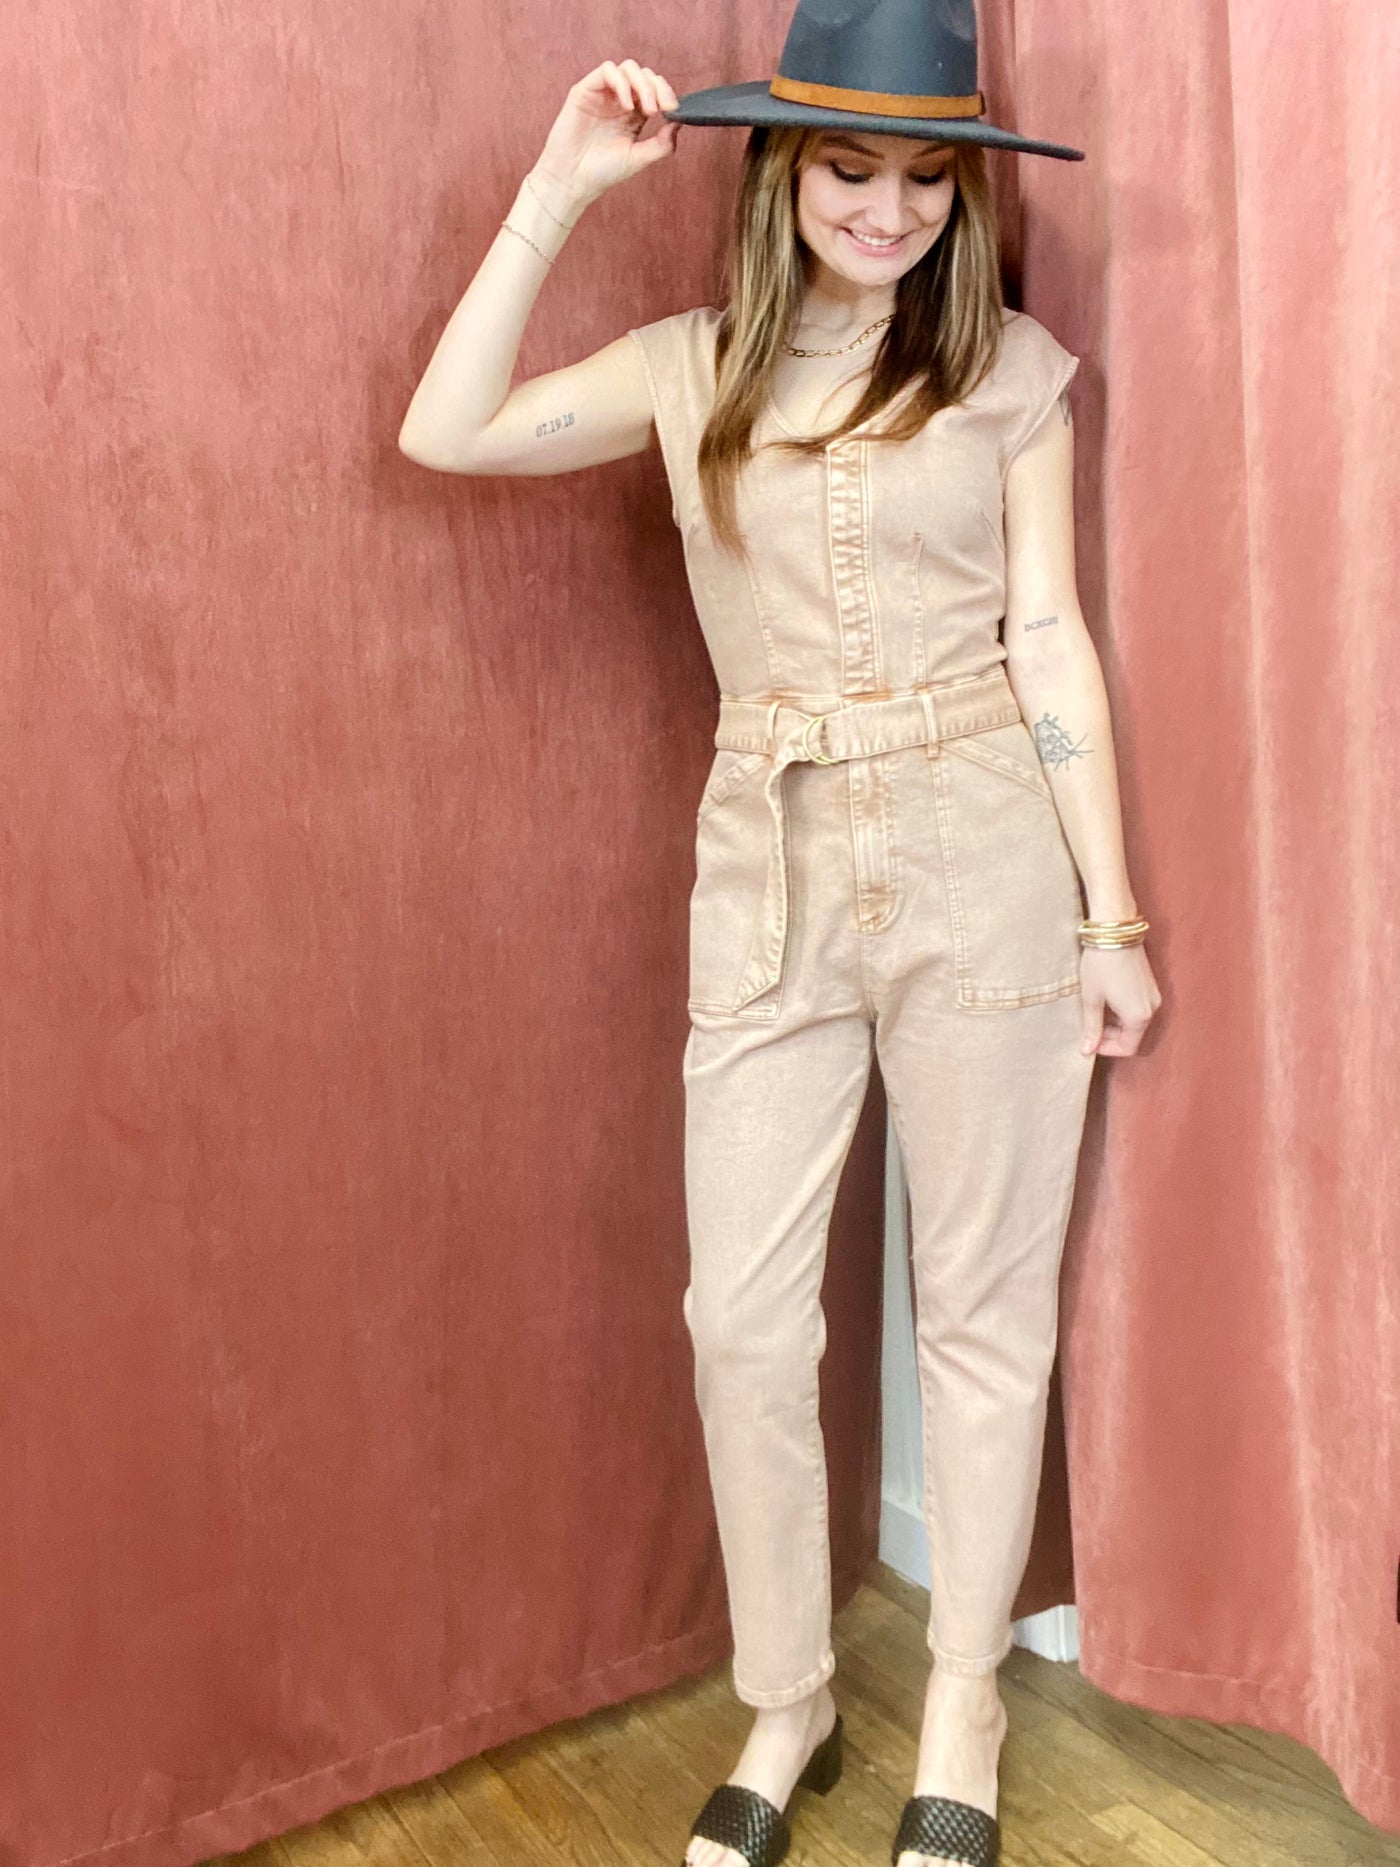 Nicole Denim Jumpsuit DEAR JOHN-Jumpsuits and Rompers-Anatomy Clothing Boutique in Brenham, Texas